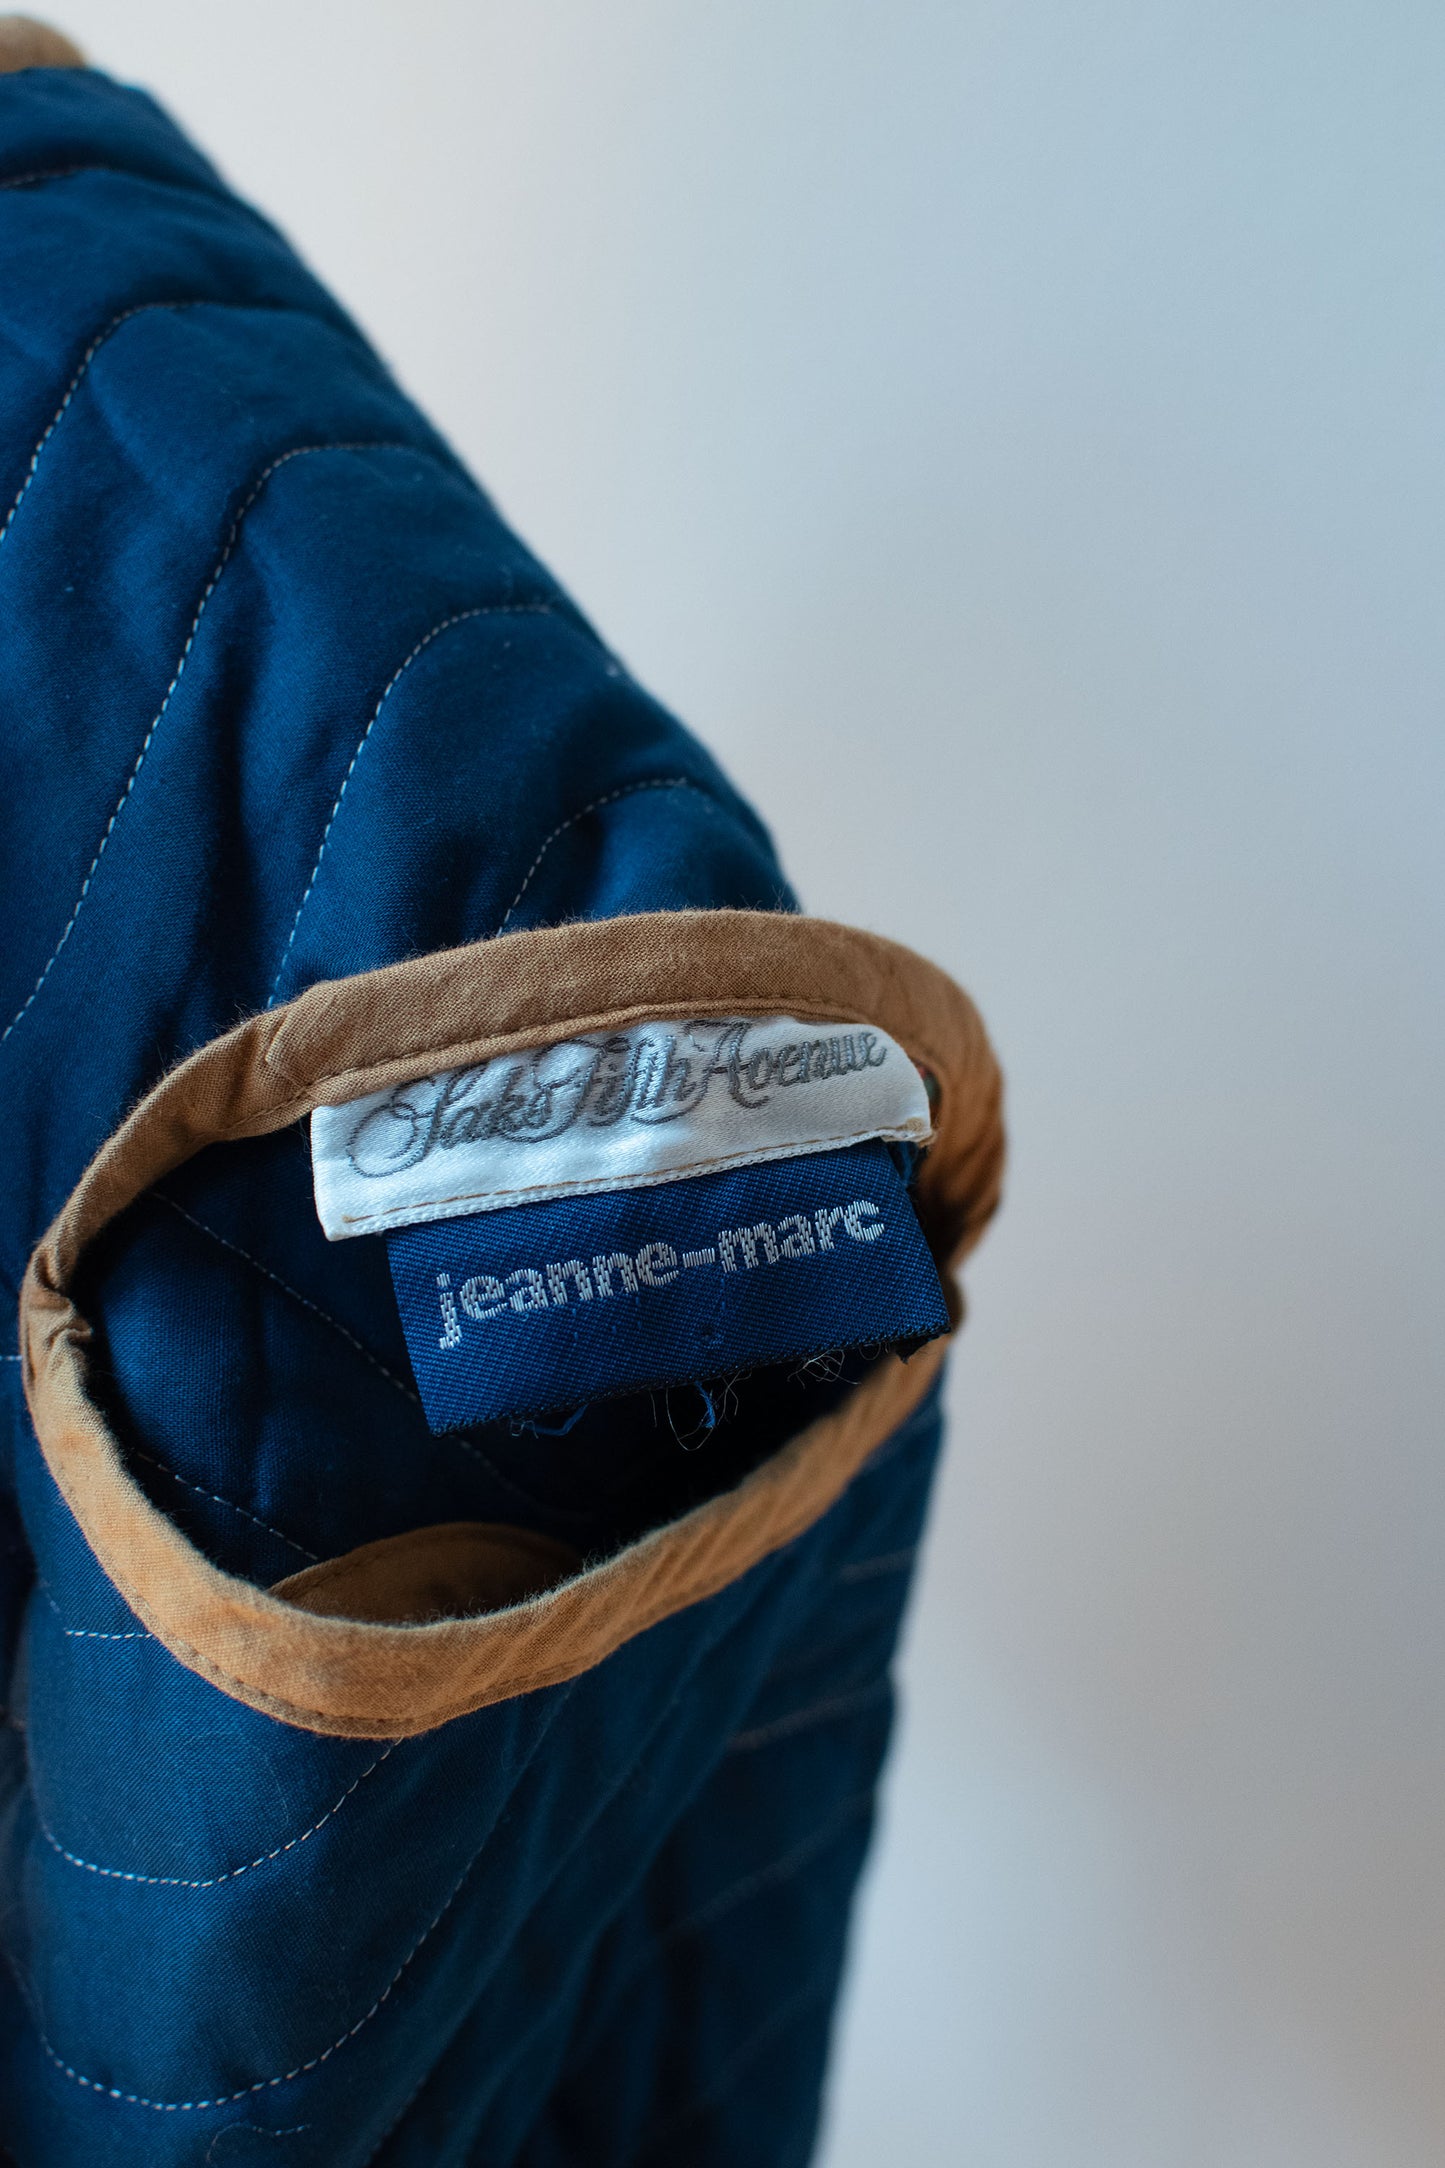 1980s Reversible Quilted Top | Jeanne Marc